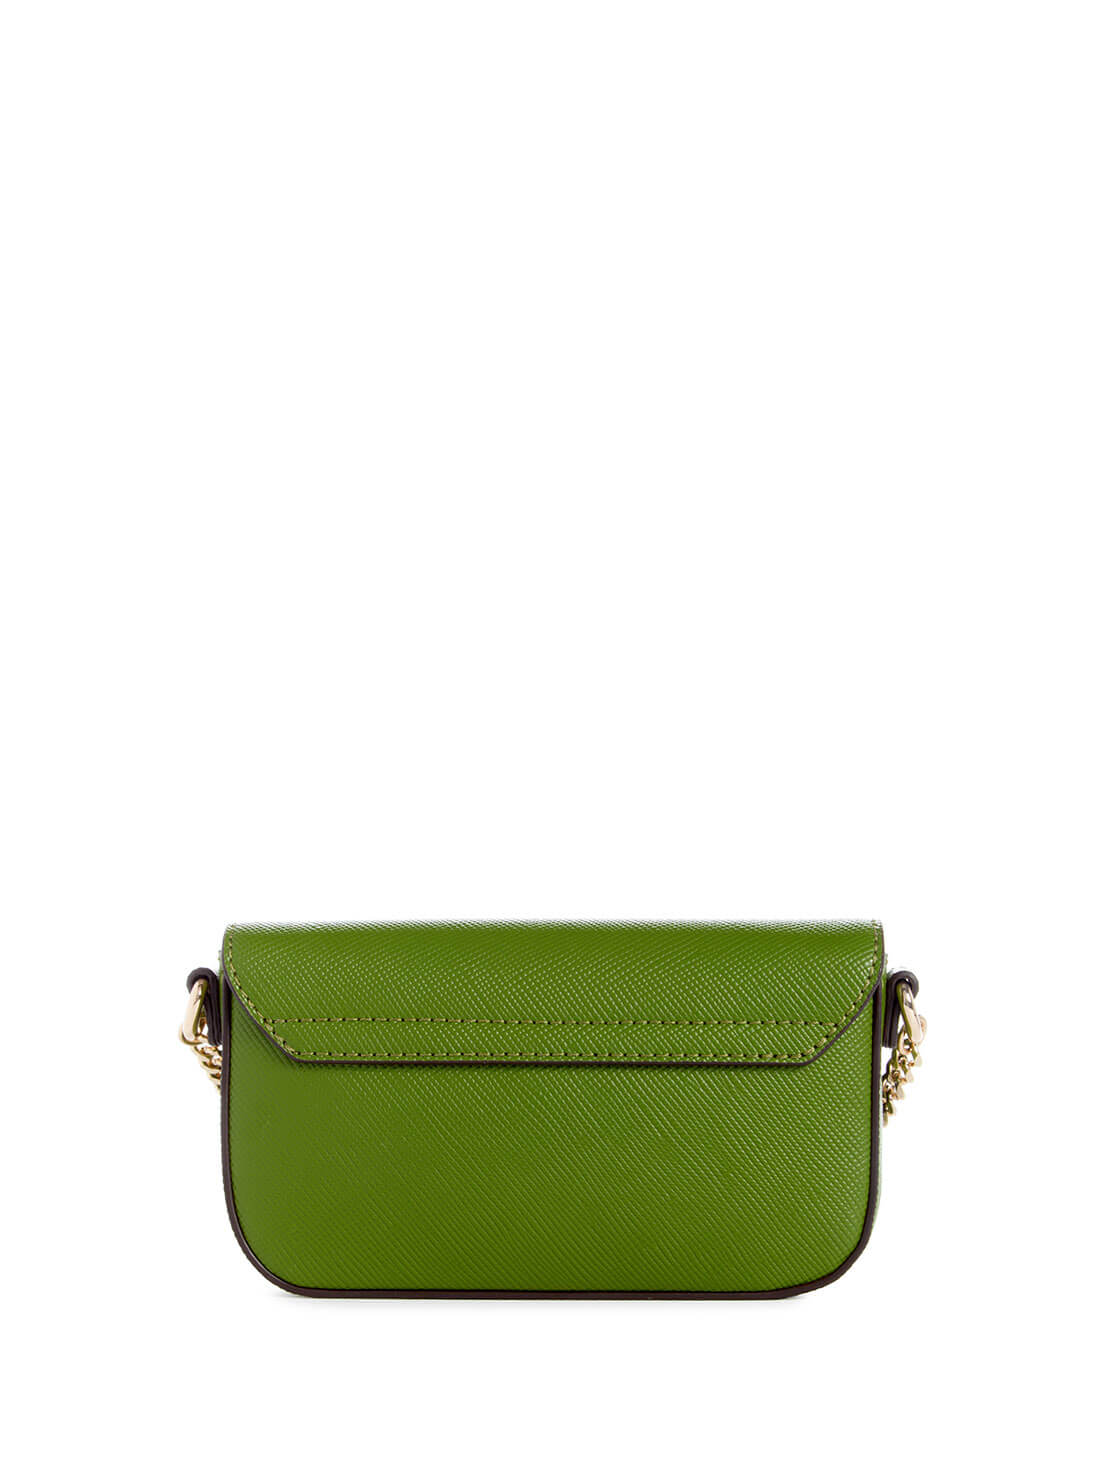 Women's Green Brynlee Micro Mini Shoulder Bag back view